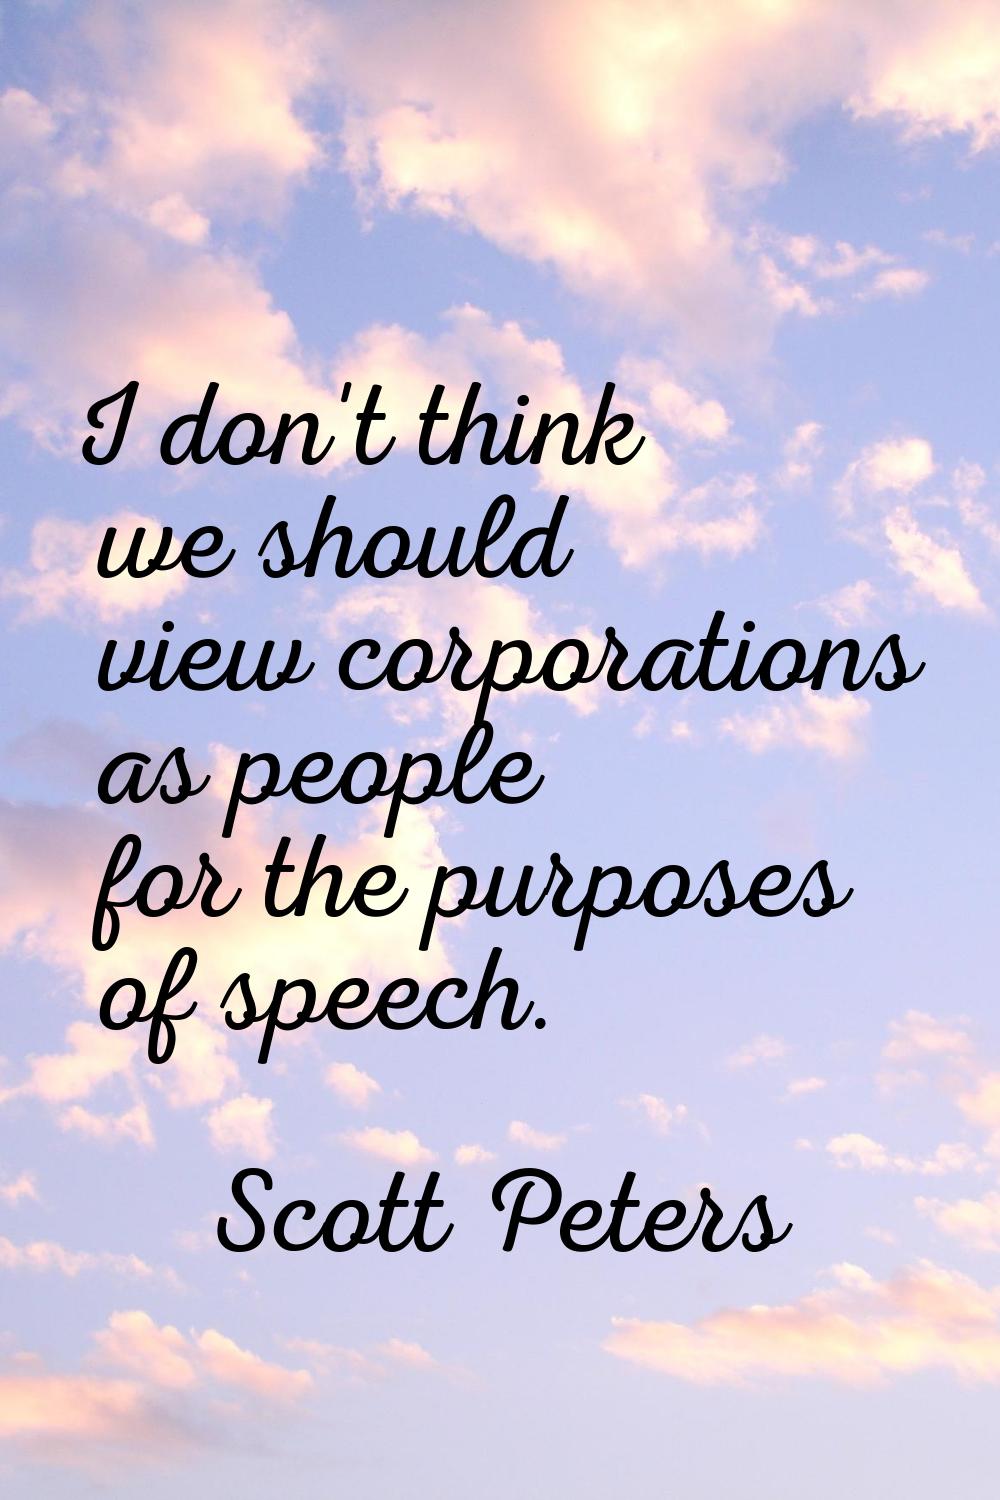 I don't think we should view corporations as people for the purposes of speech.